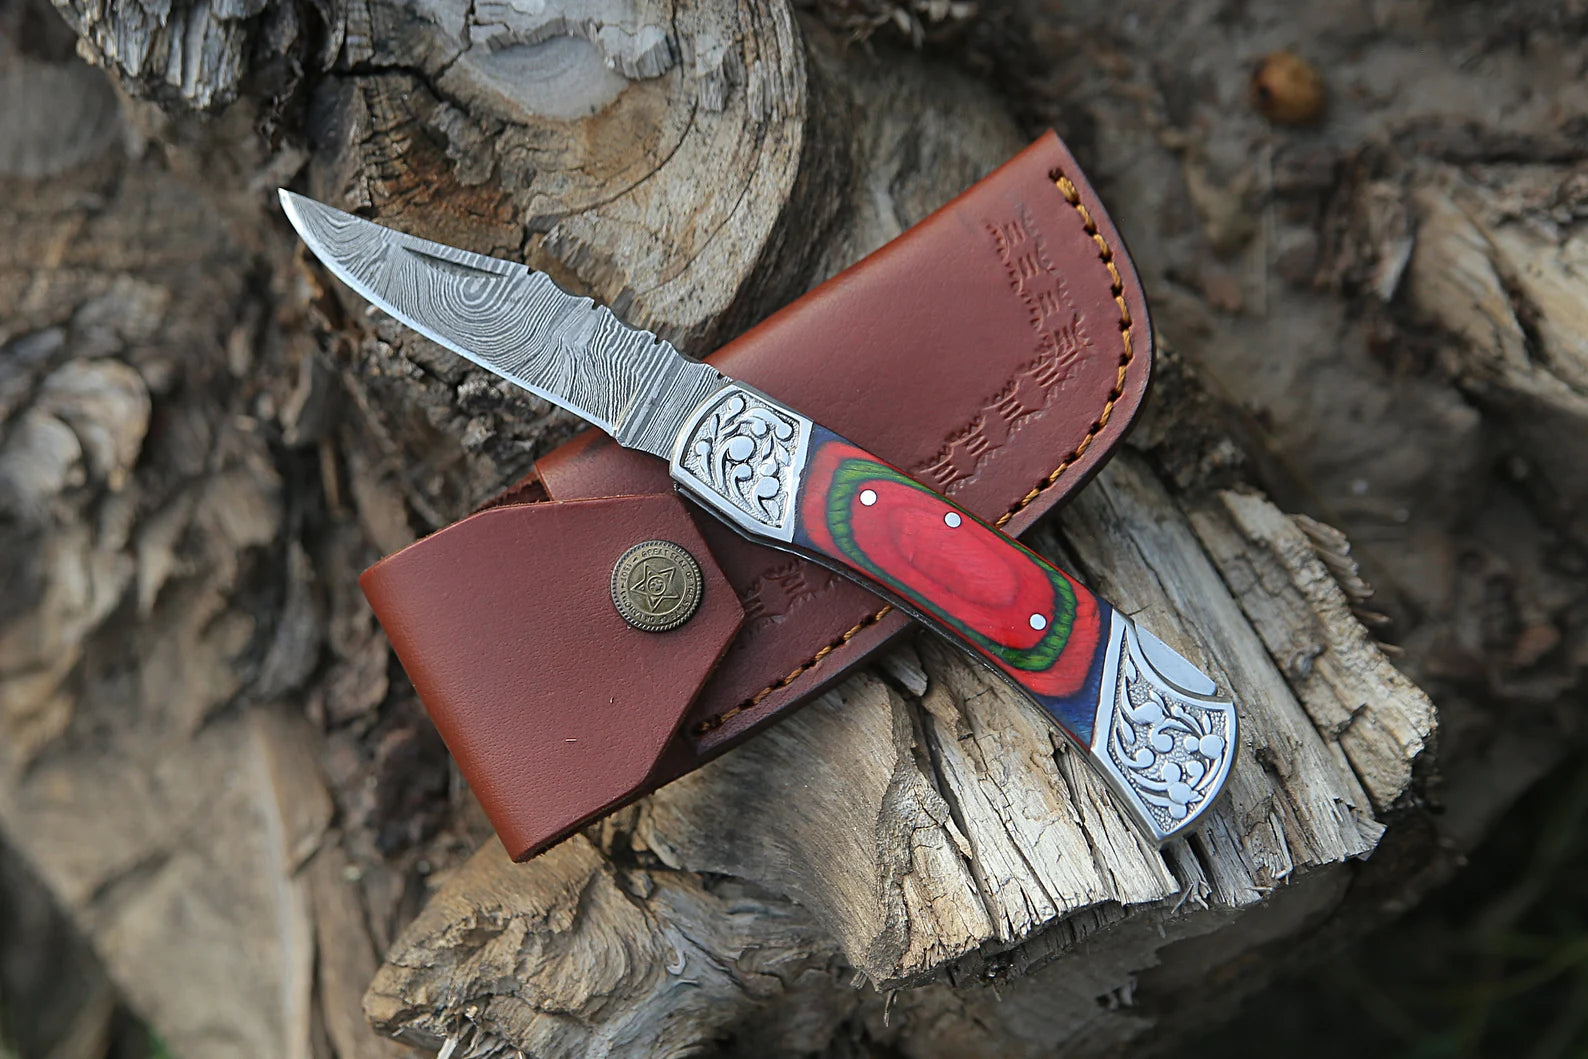 Damascus Steel Folding Pocket Knife – Red, Green and Blue Handle